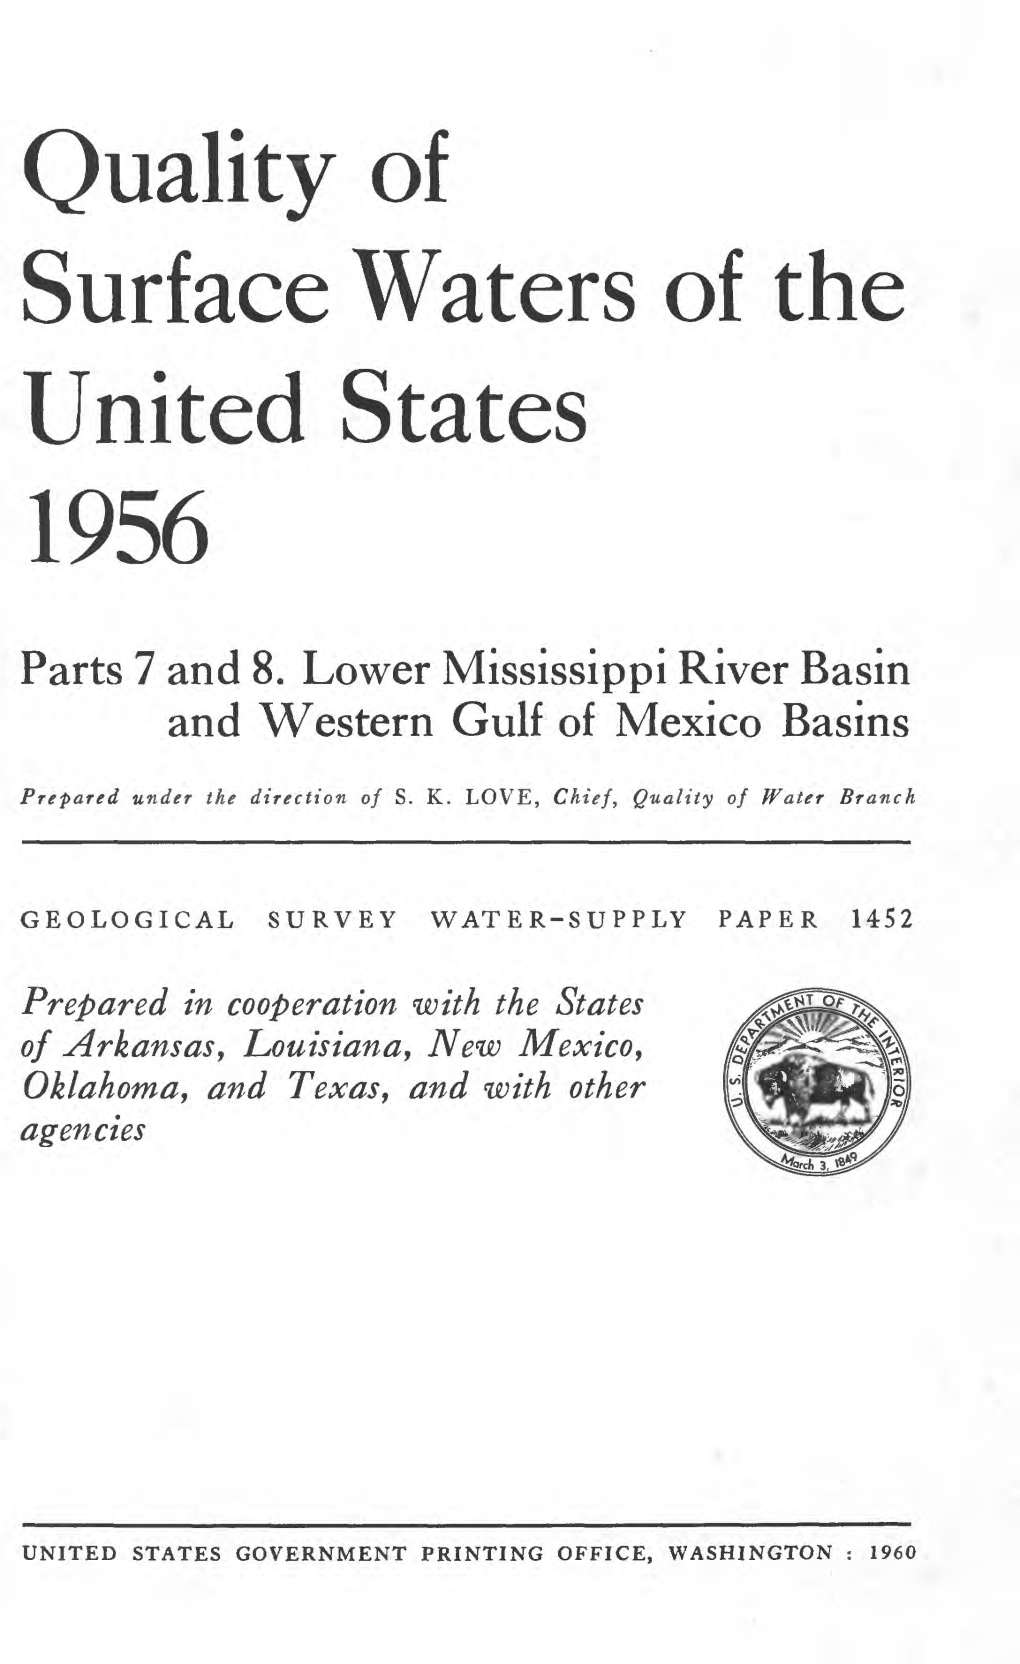 Quality of Surface Waters of the United States 1956